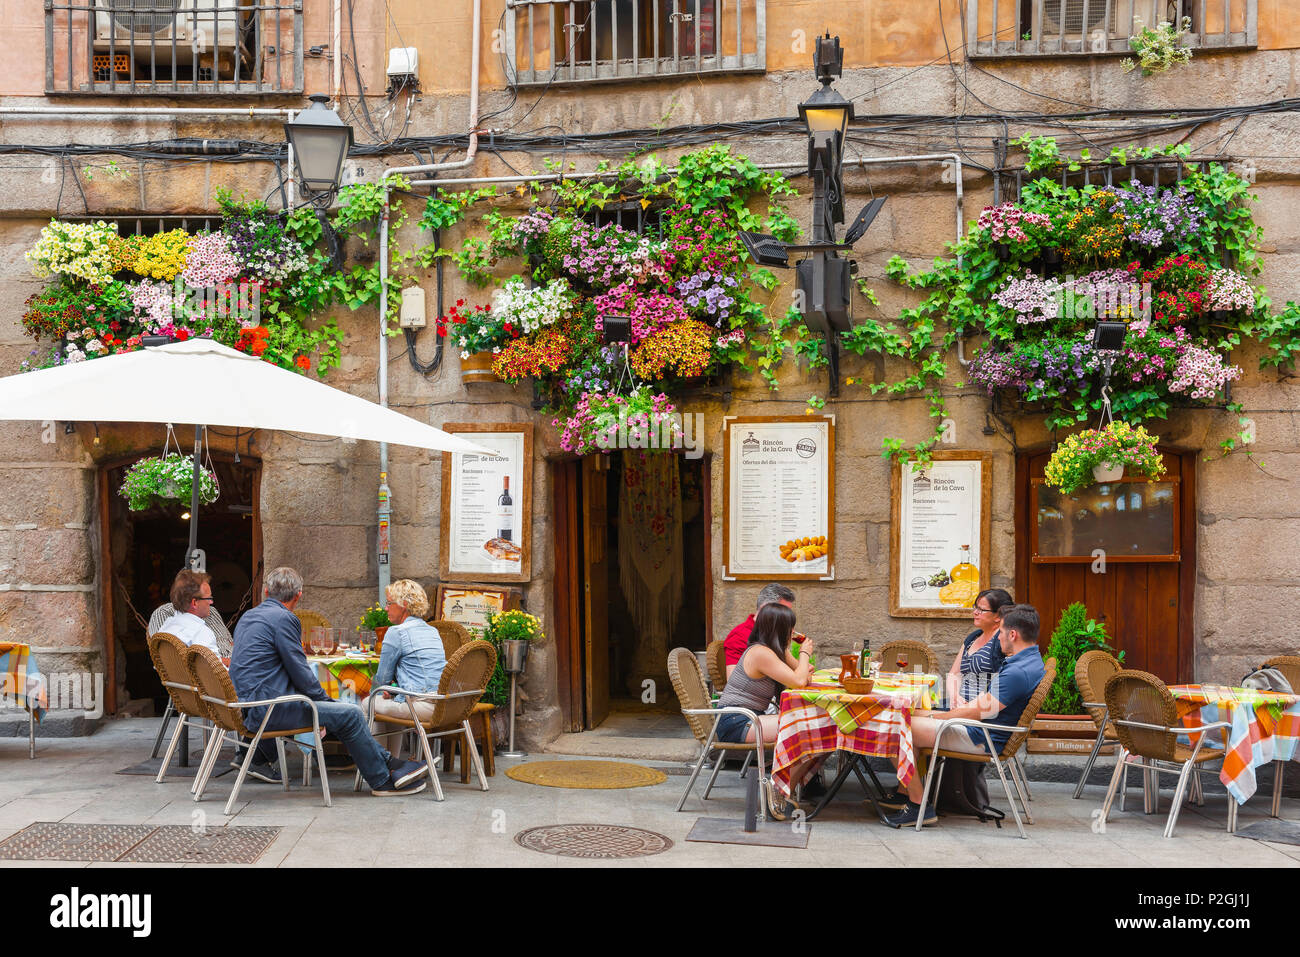 Madrid street cafe, view on a summer afternoon of people relaxing at cafe tables in the historic Calle Cuchilleros old town quarter of Madrid, Spain. Stock Photo